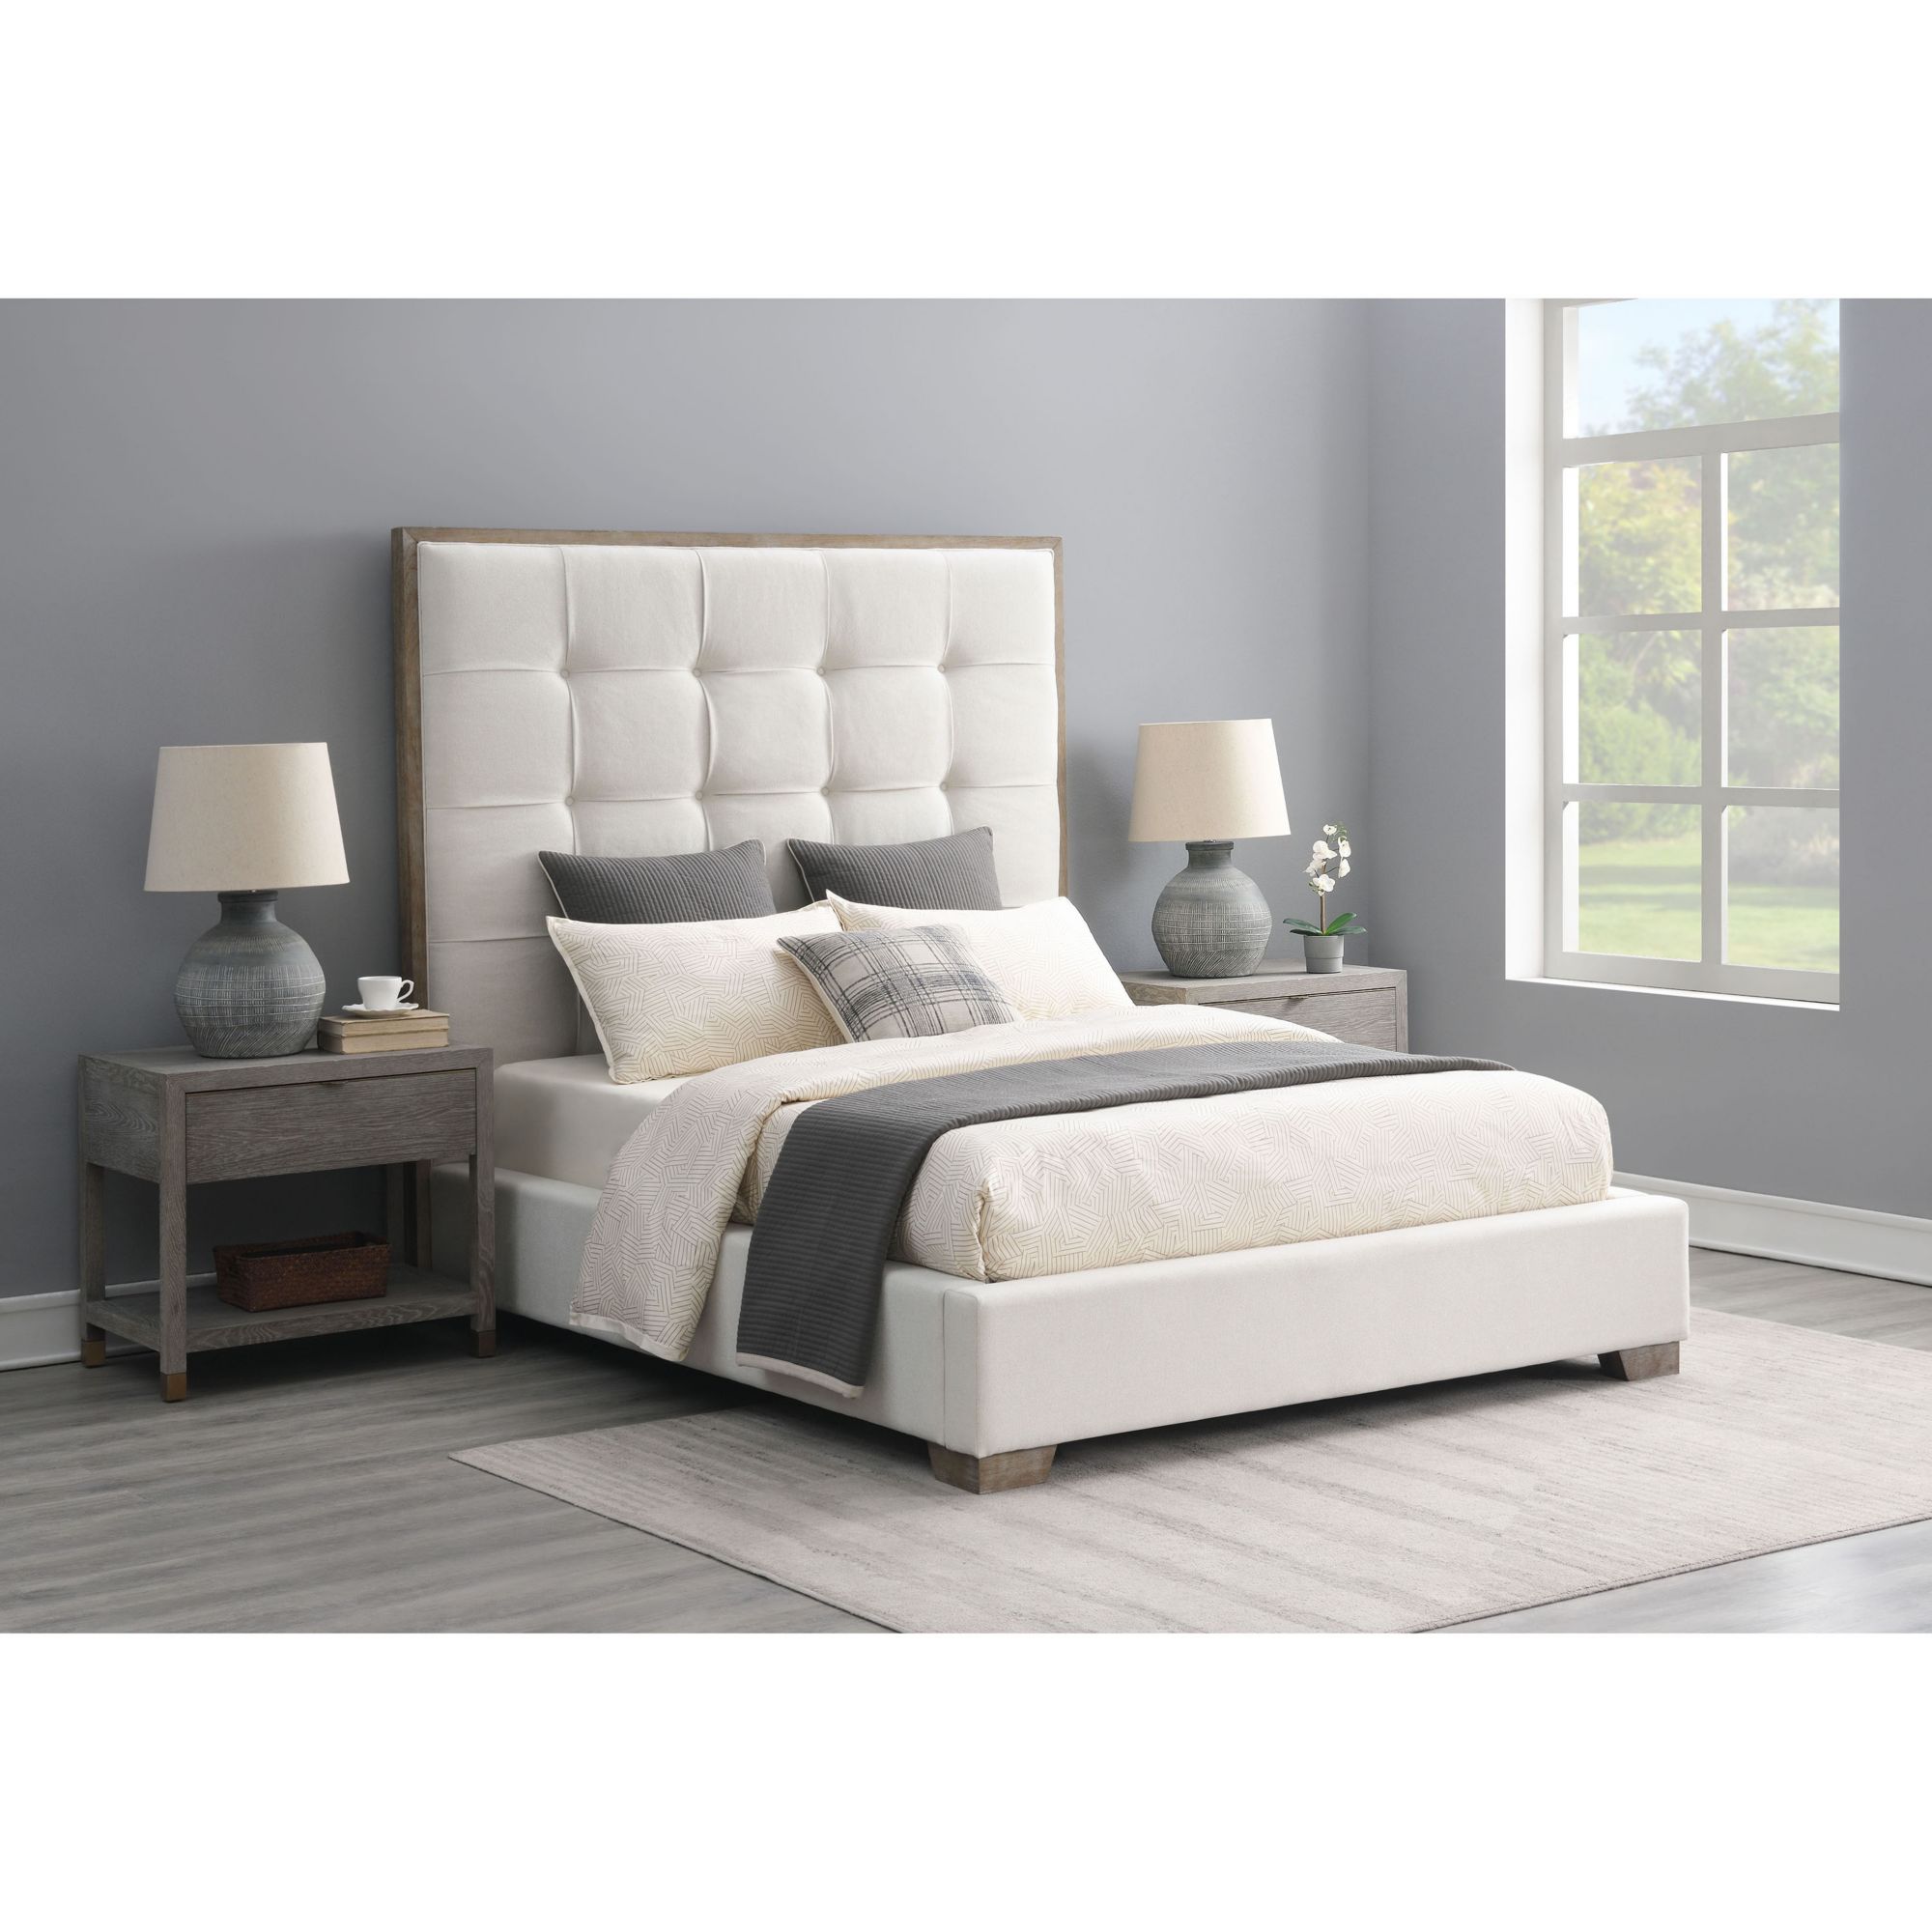 Abbyson Home Remi Stain Resistant Queen Bed - Ivory